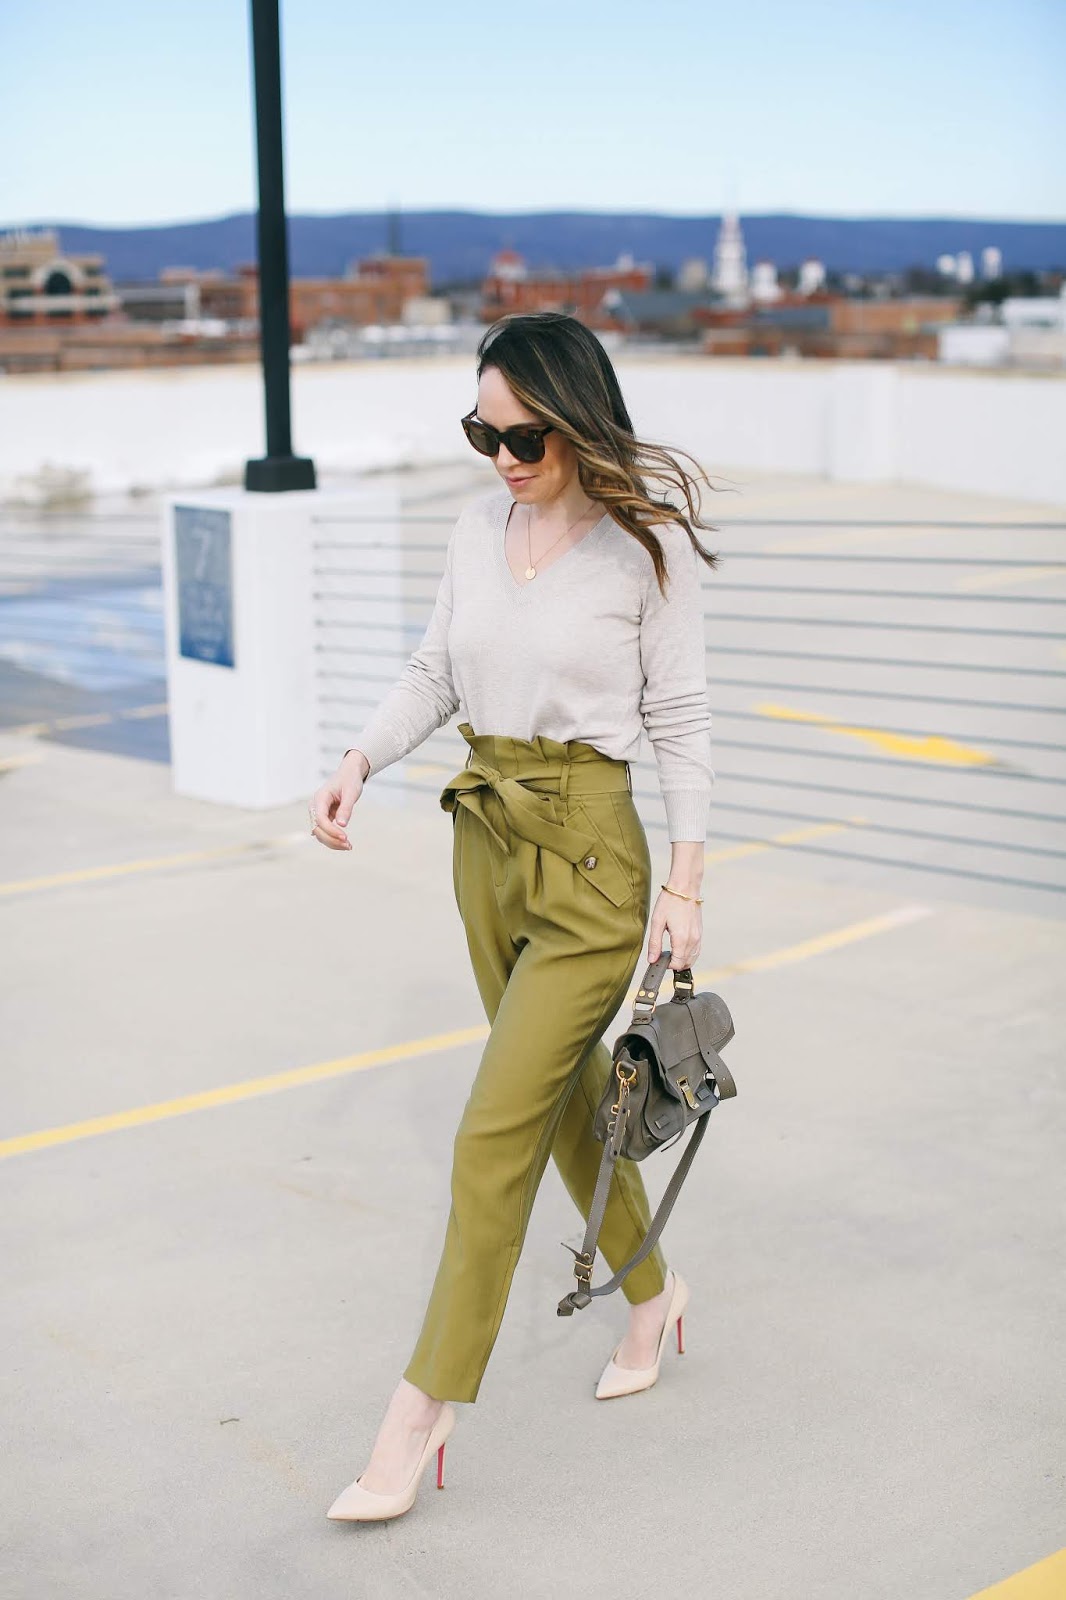 An Affordable Workwear Look For Spring + A Few Tips On Dressing Taller ...